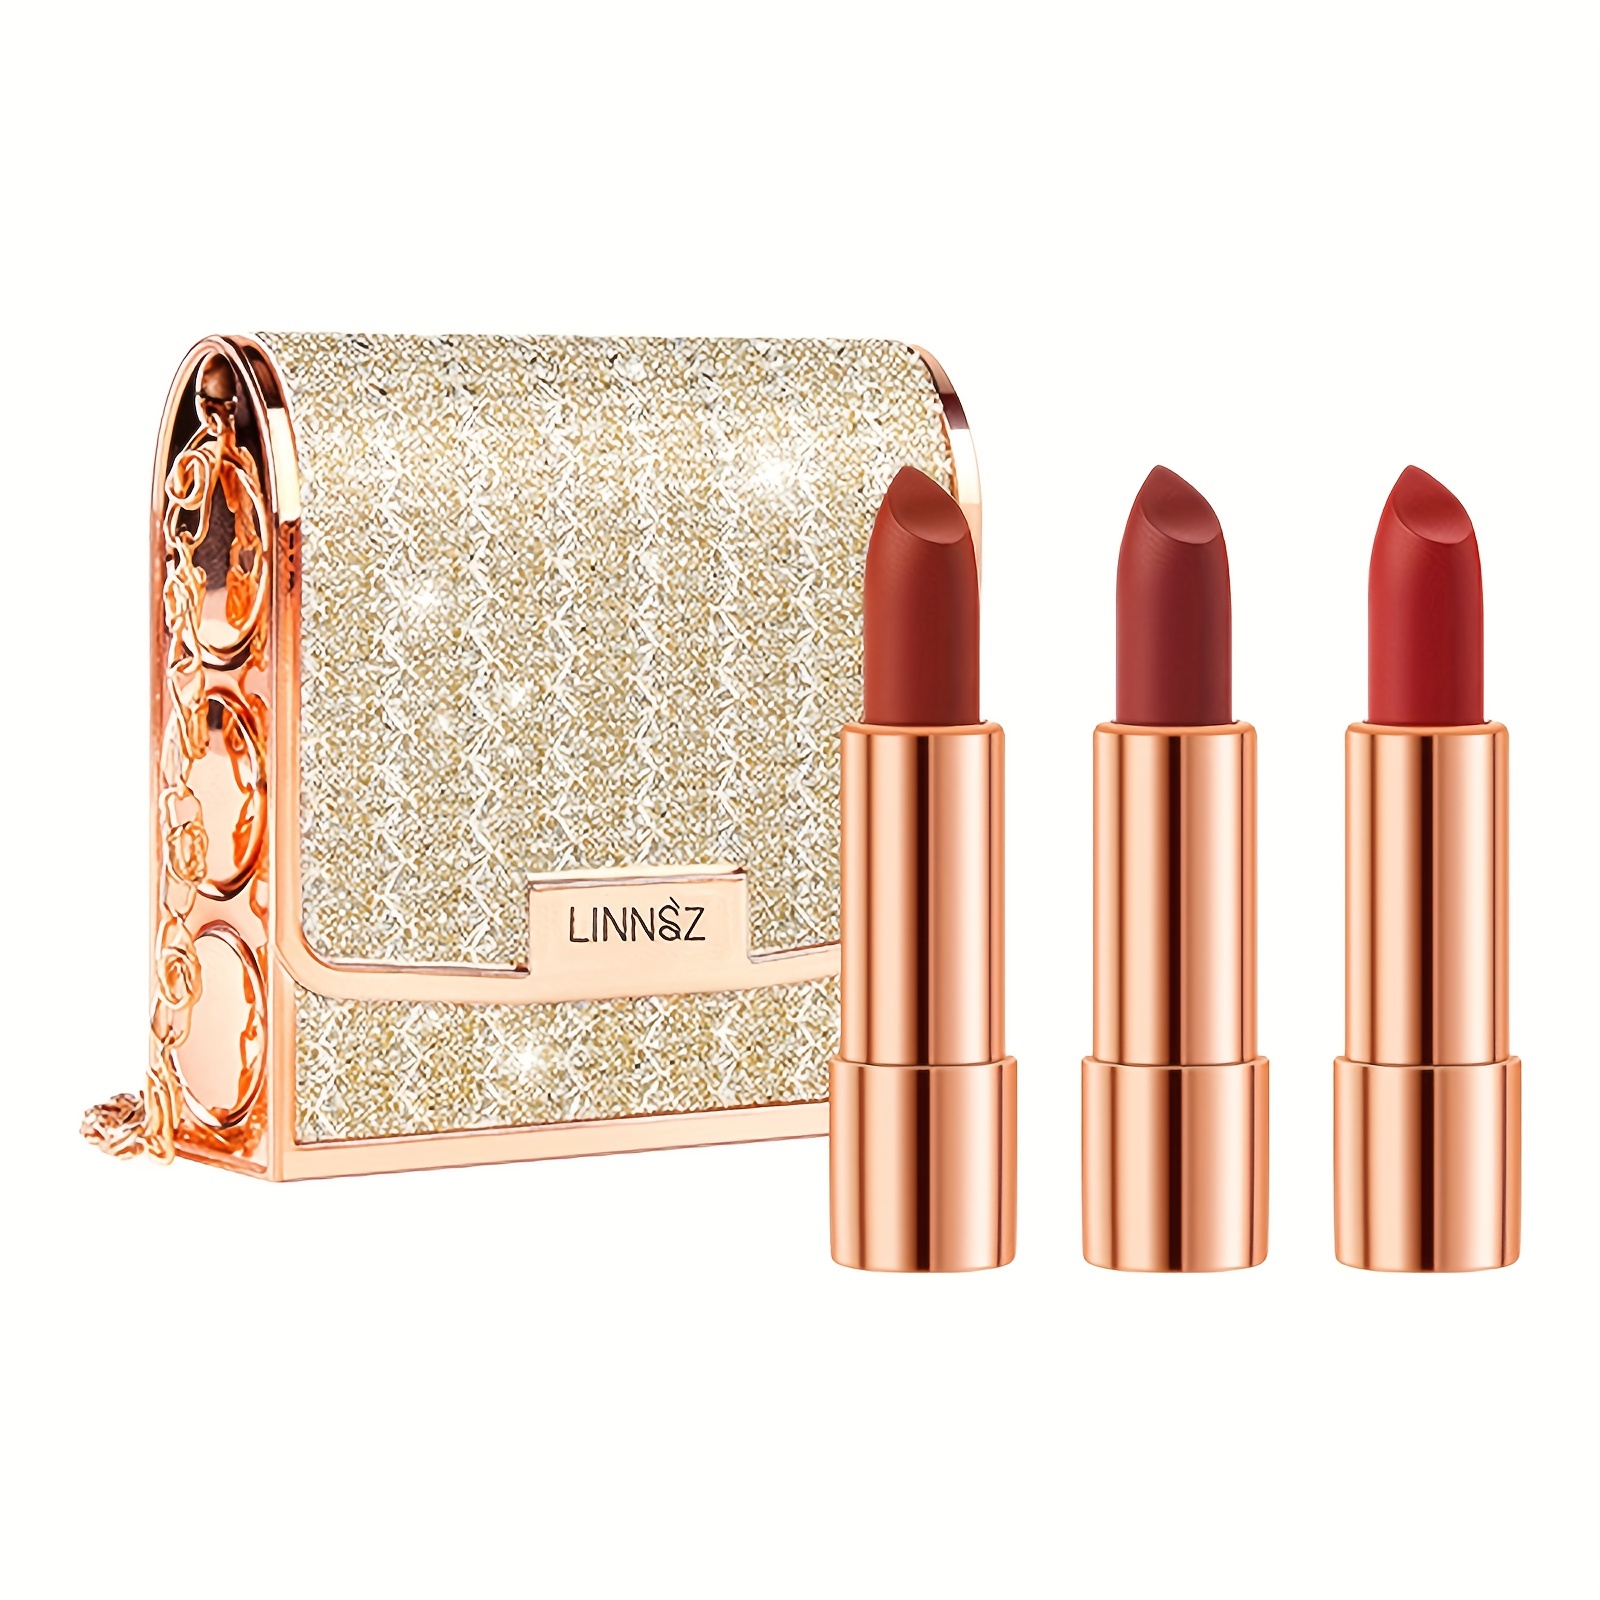 

Velvet Texture Matte Lipstick Set - Long Lasting, Waterproof, Smudge Proof, Retractable Red Lipstick With Slivery Chain Bag Package Valentine's Day Gifts